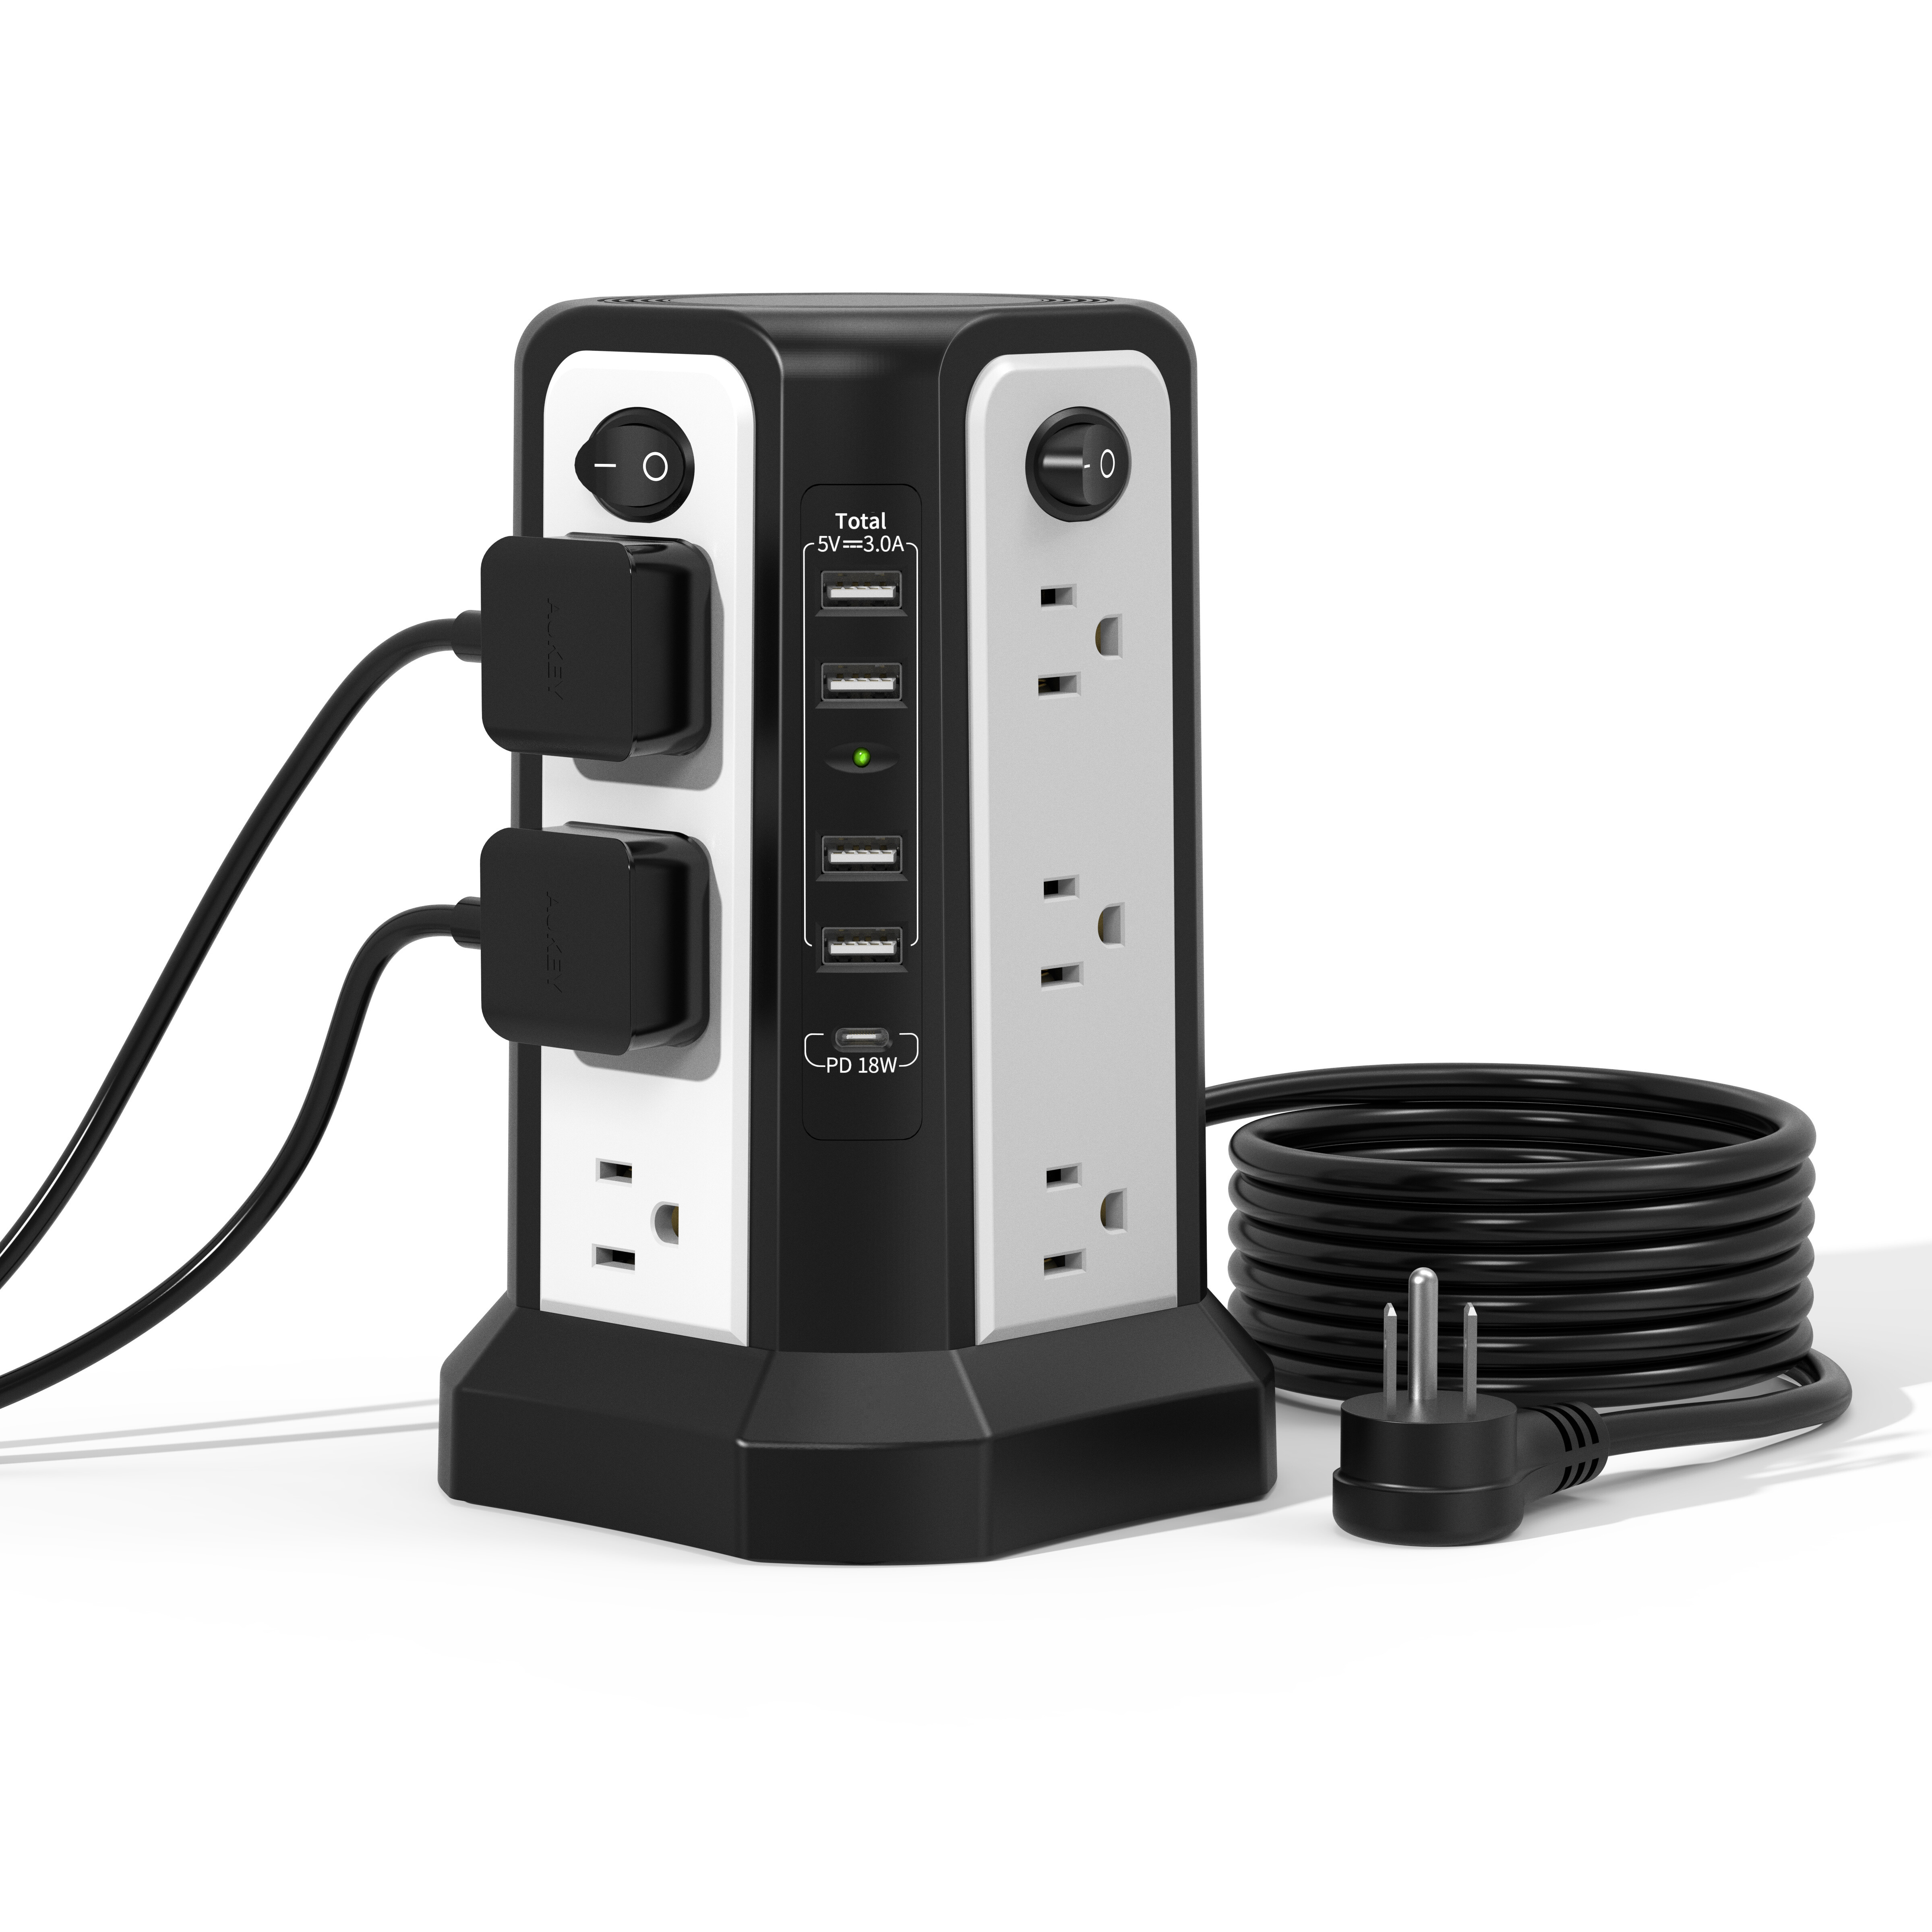 1pc Surge Protector Power Strip Tower With USB C Port(PD18W),10FT Extension  Cord With 12 AC Outlets 5 USB Charging Ports, Power Strip Surge Protector